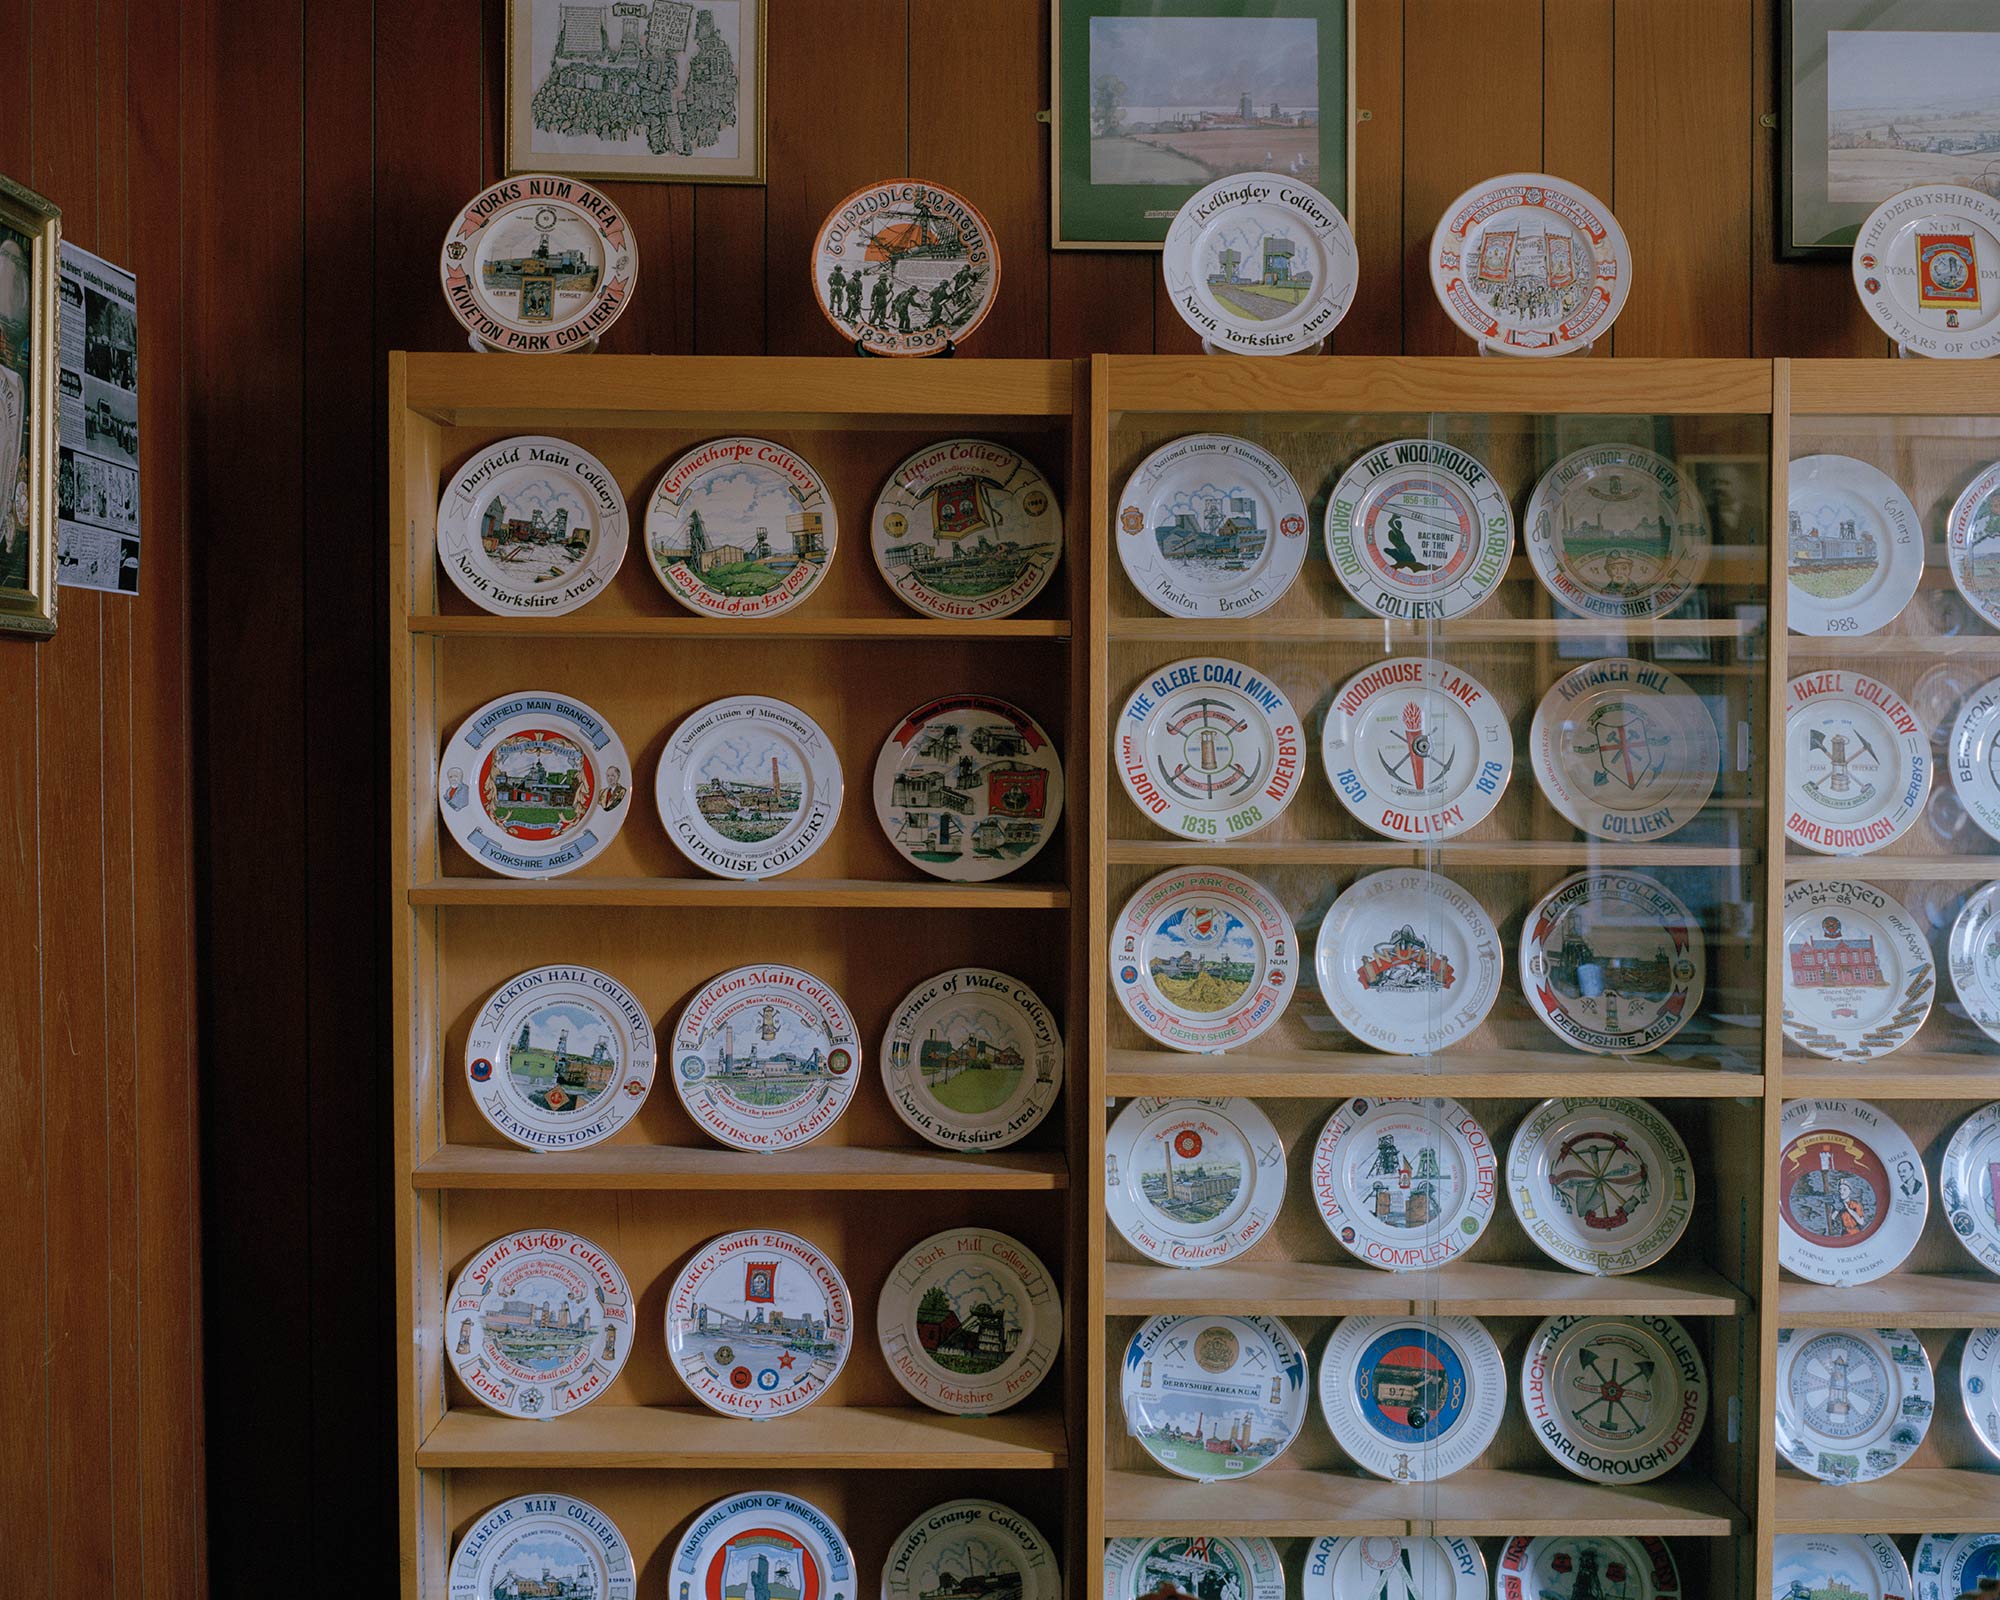 Commemorative plate collection, National Union of Mineworkers, Barnsley, South Yorkshire.